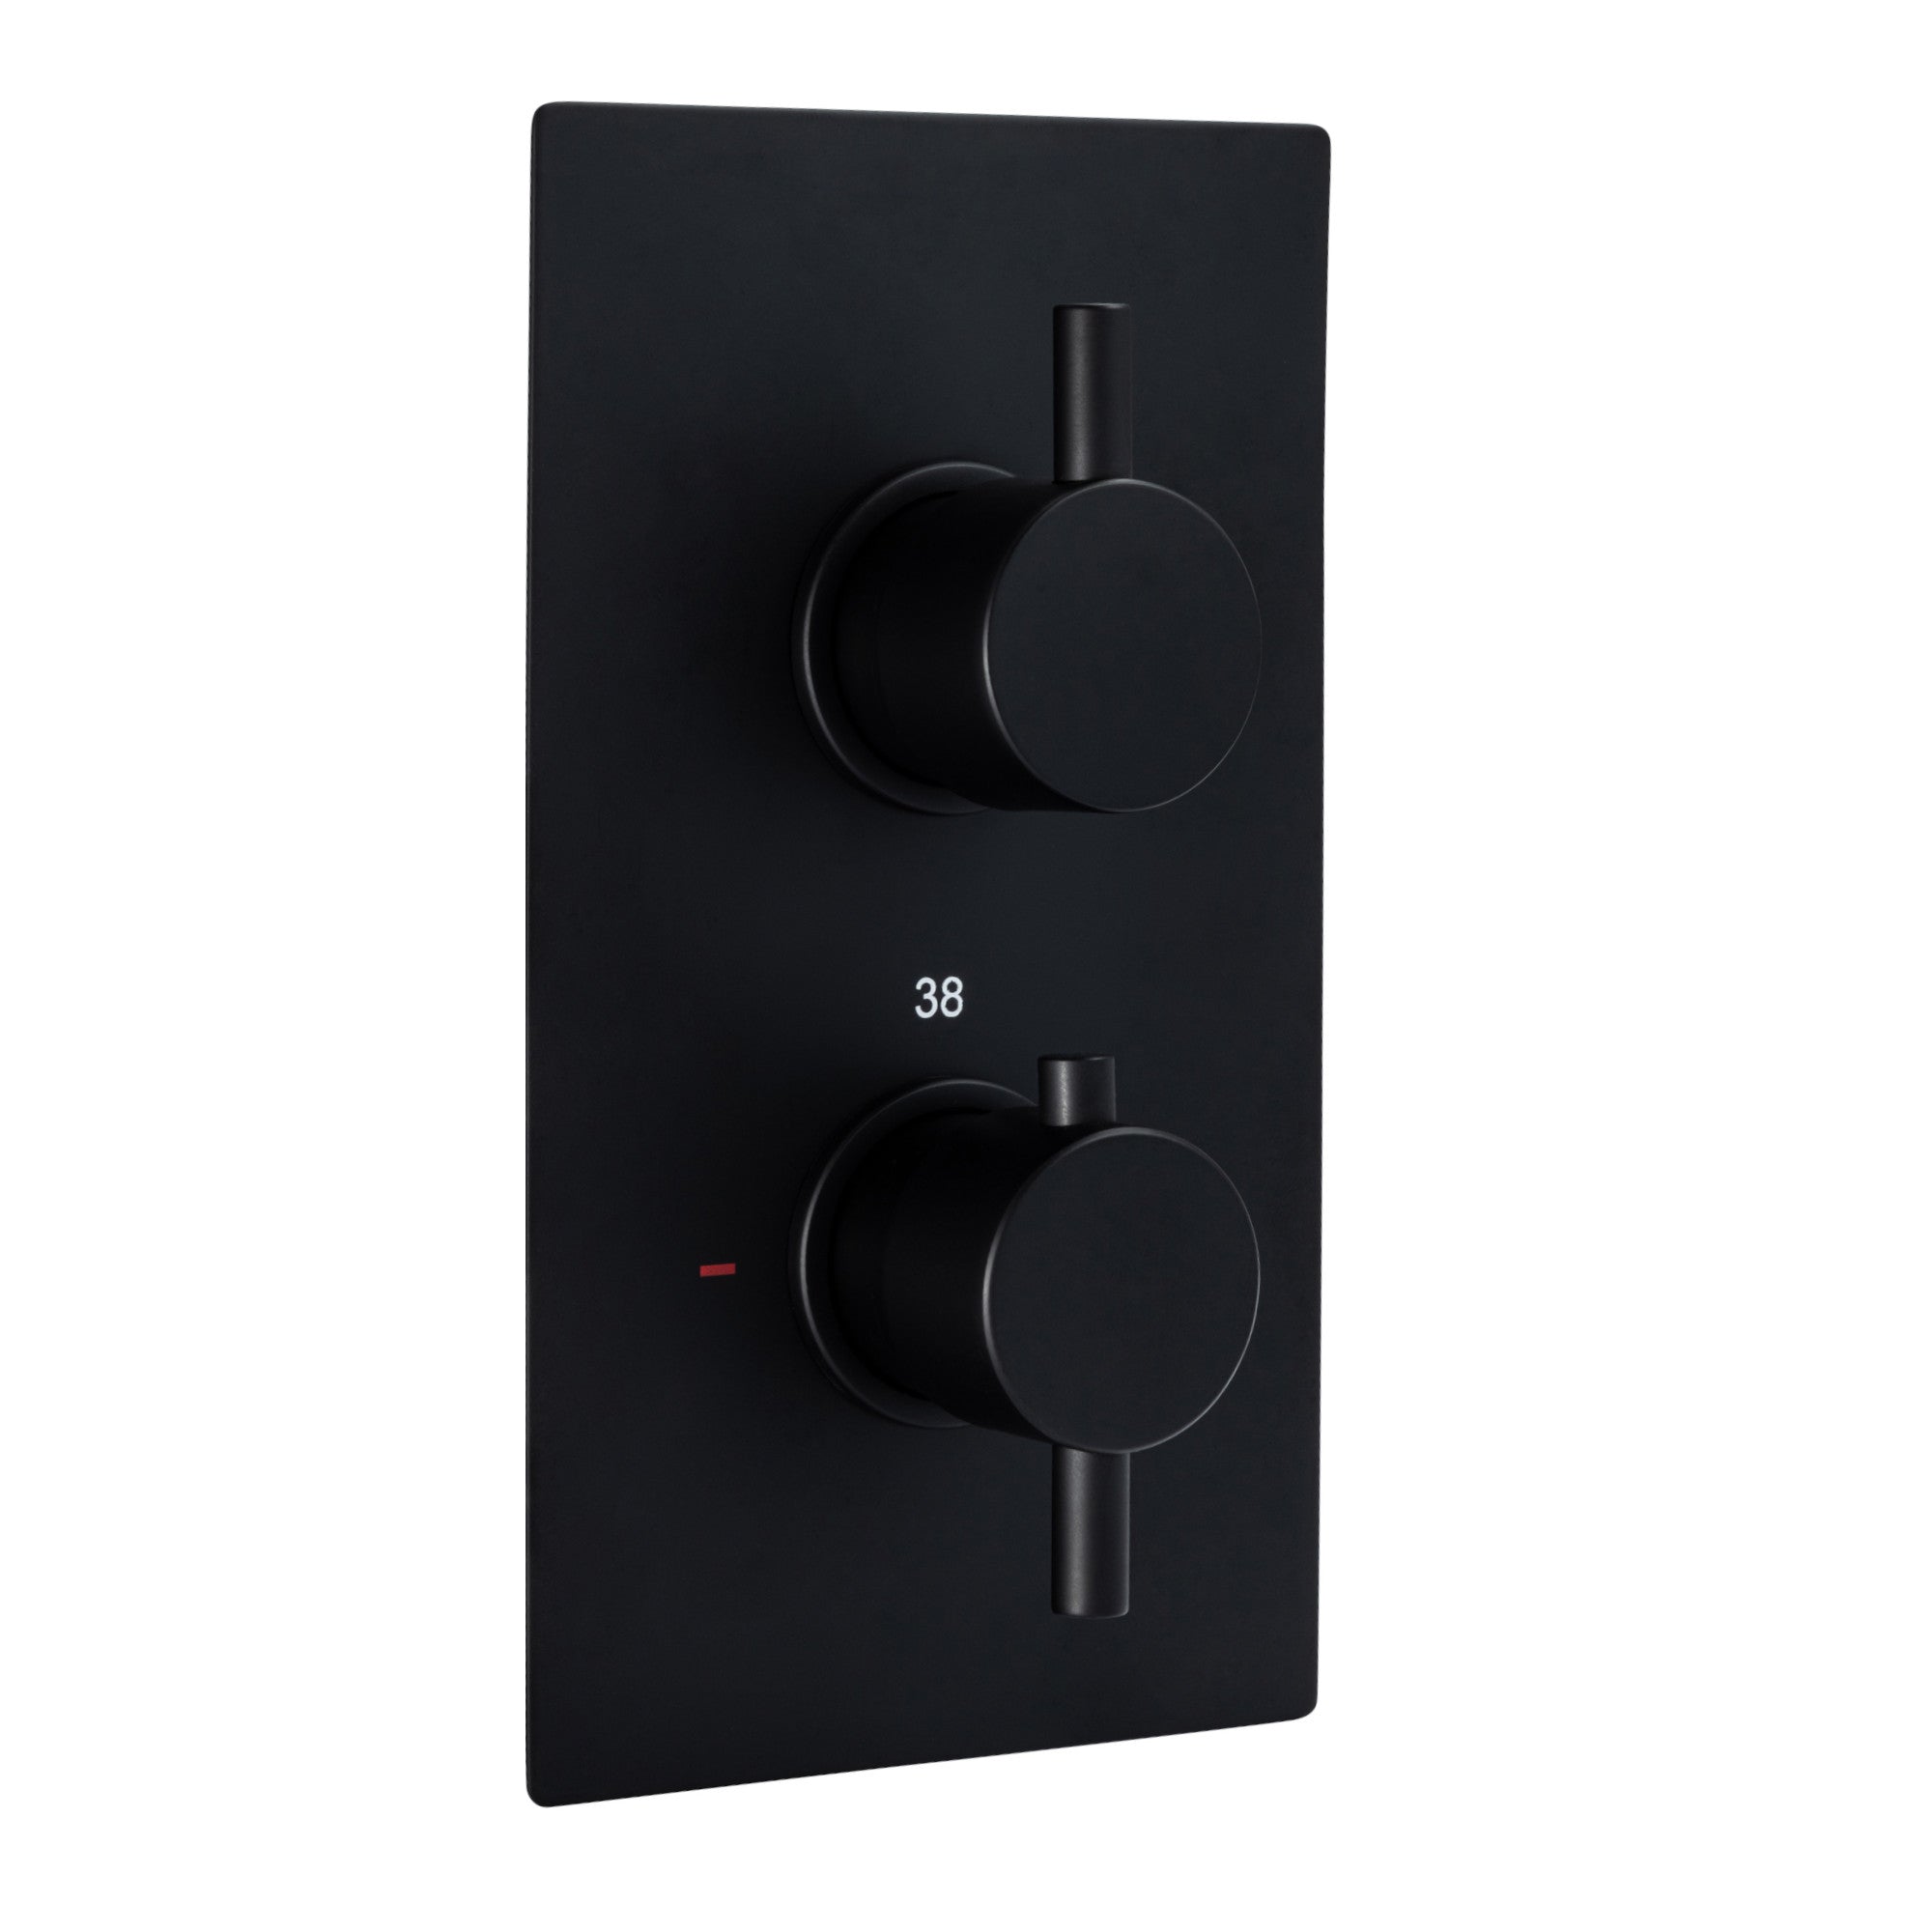 Venice contemporary round concealed thermostatic twin shower valve with 2 outlets - matte black